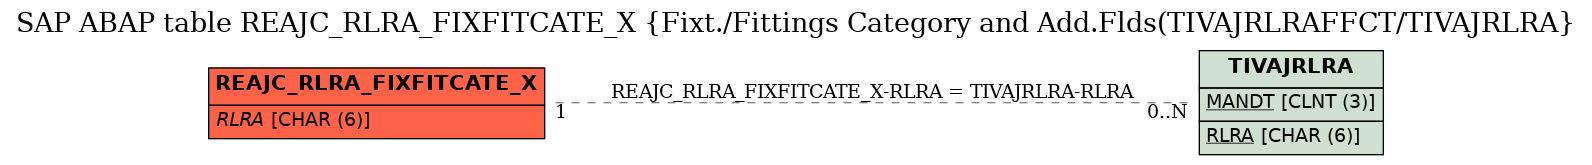 E-R Diagram for table REAJC_RLRA_FIXFITCATE_X (Fixt./Fittings Category and Add.Flds(TIVAJRLRAFFCT/TIVAJRLRA)